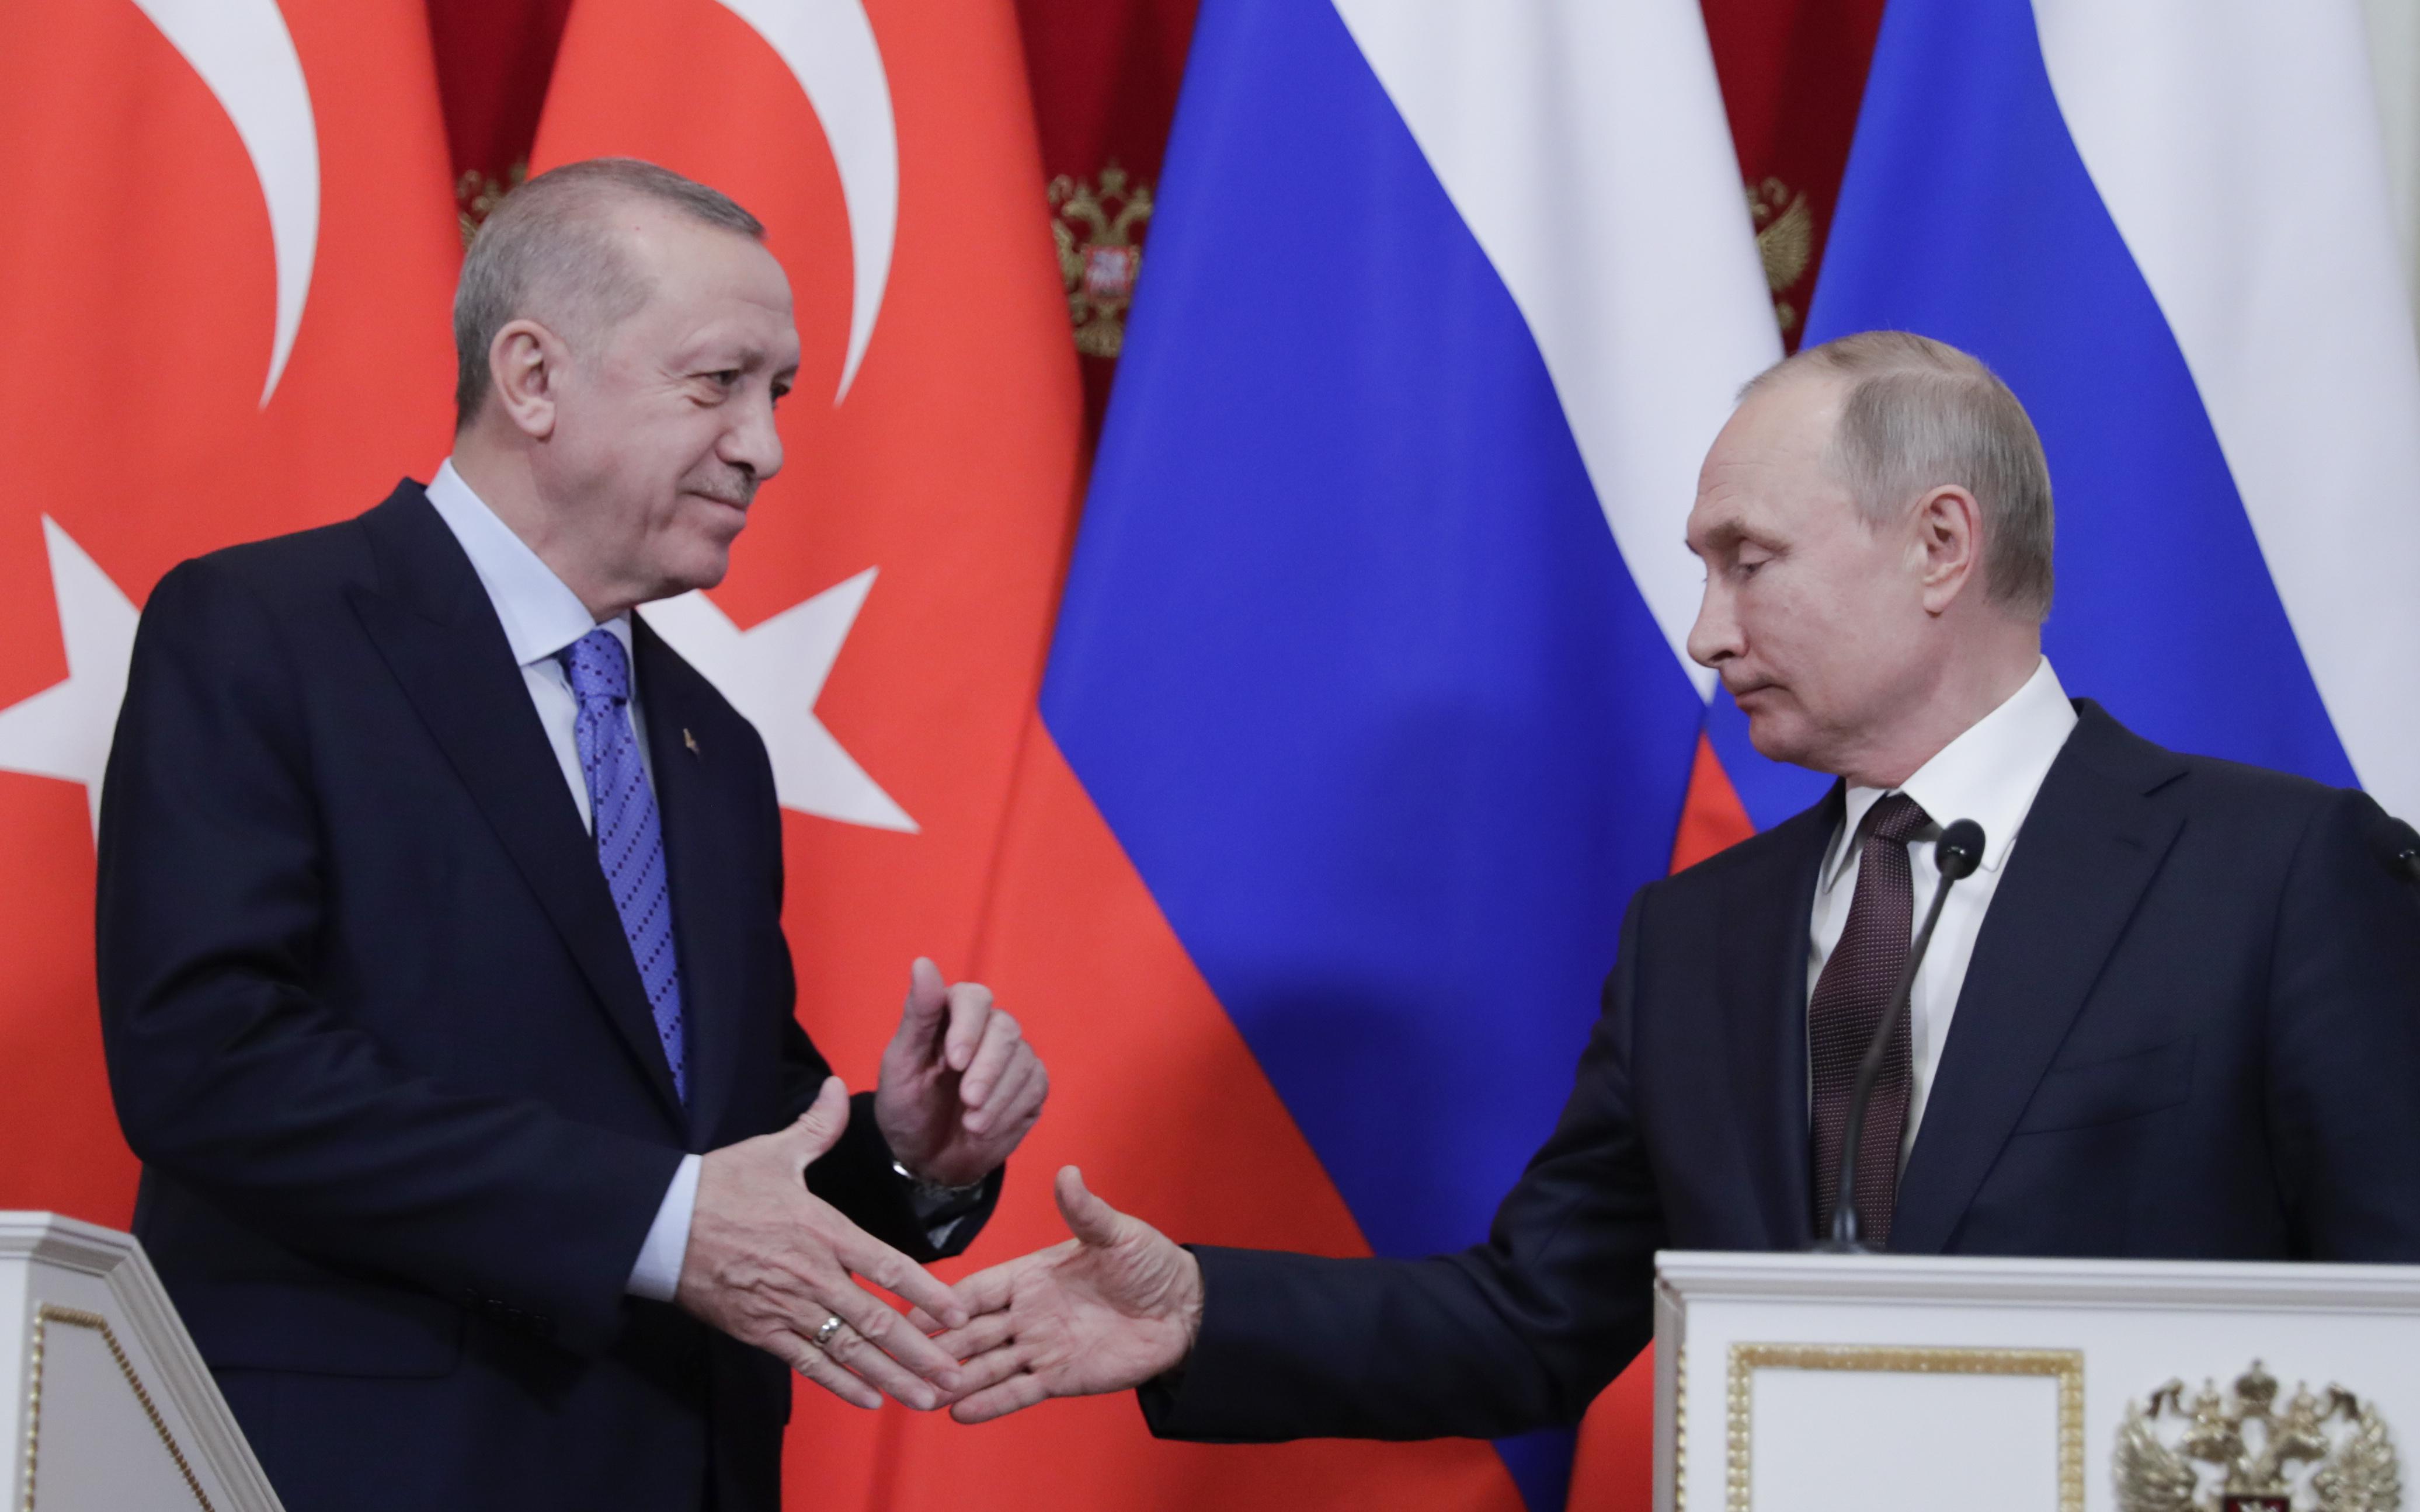 FT reported EU concerns about Russia-Turkey rapprochement